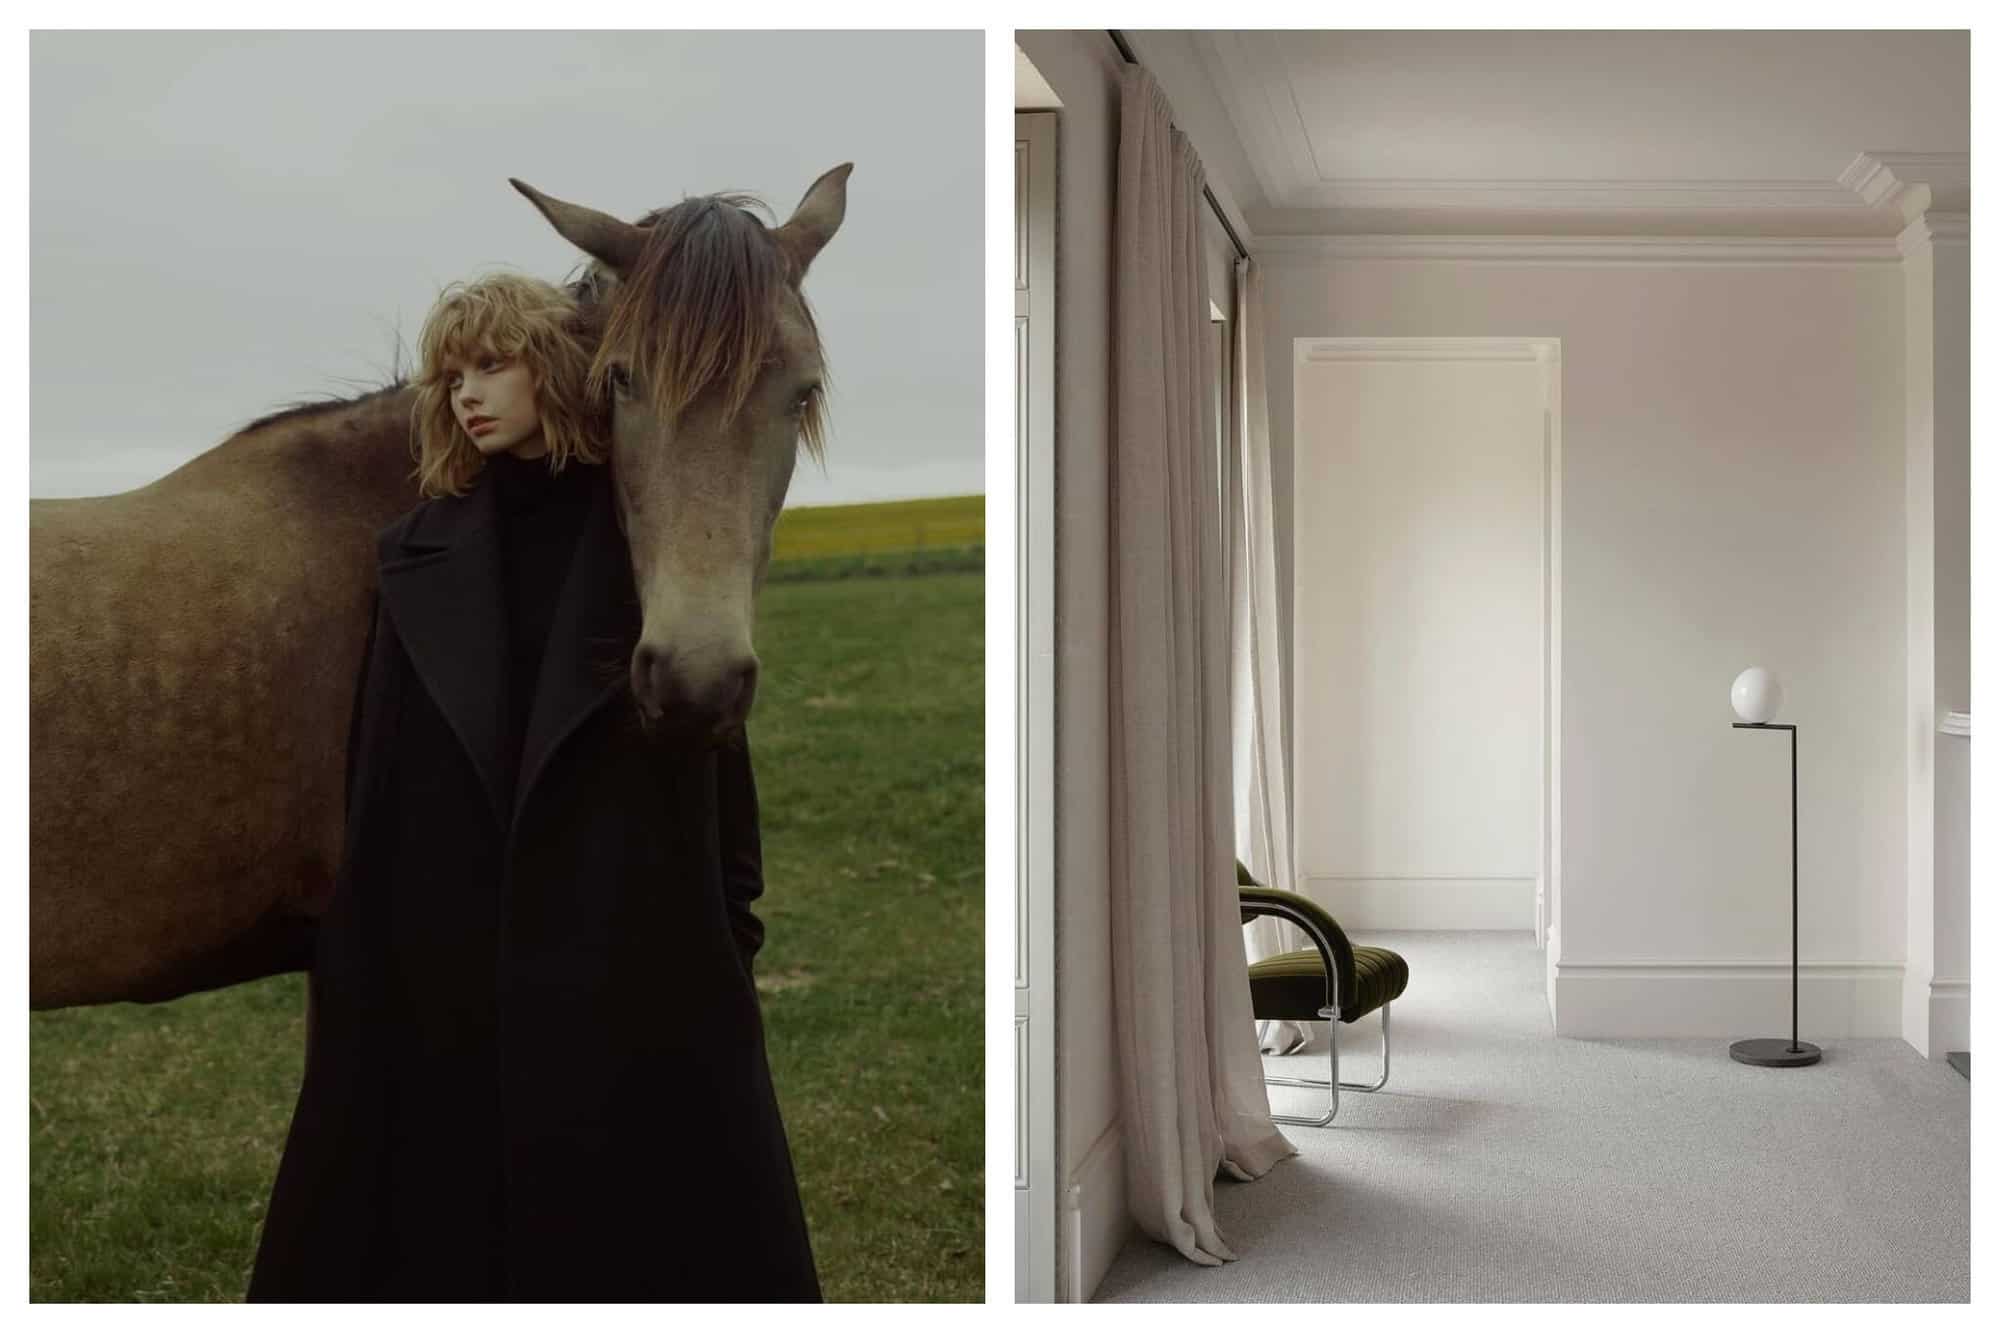 Left: A picture of a woman in black beside a brown horse. Right: A picture of a living space that is stylish and minimalist.